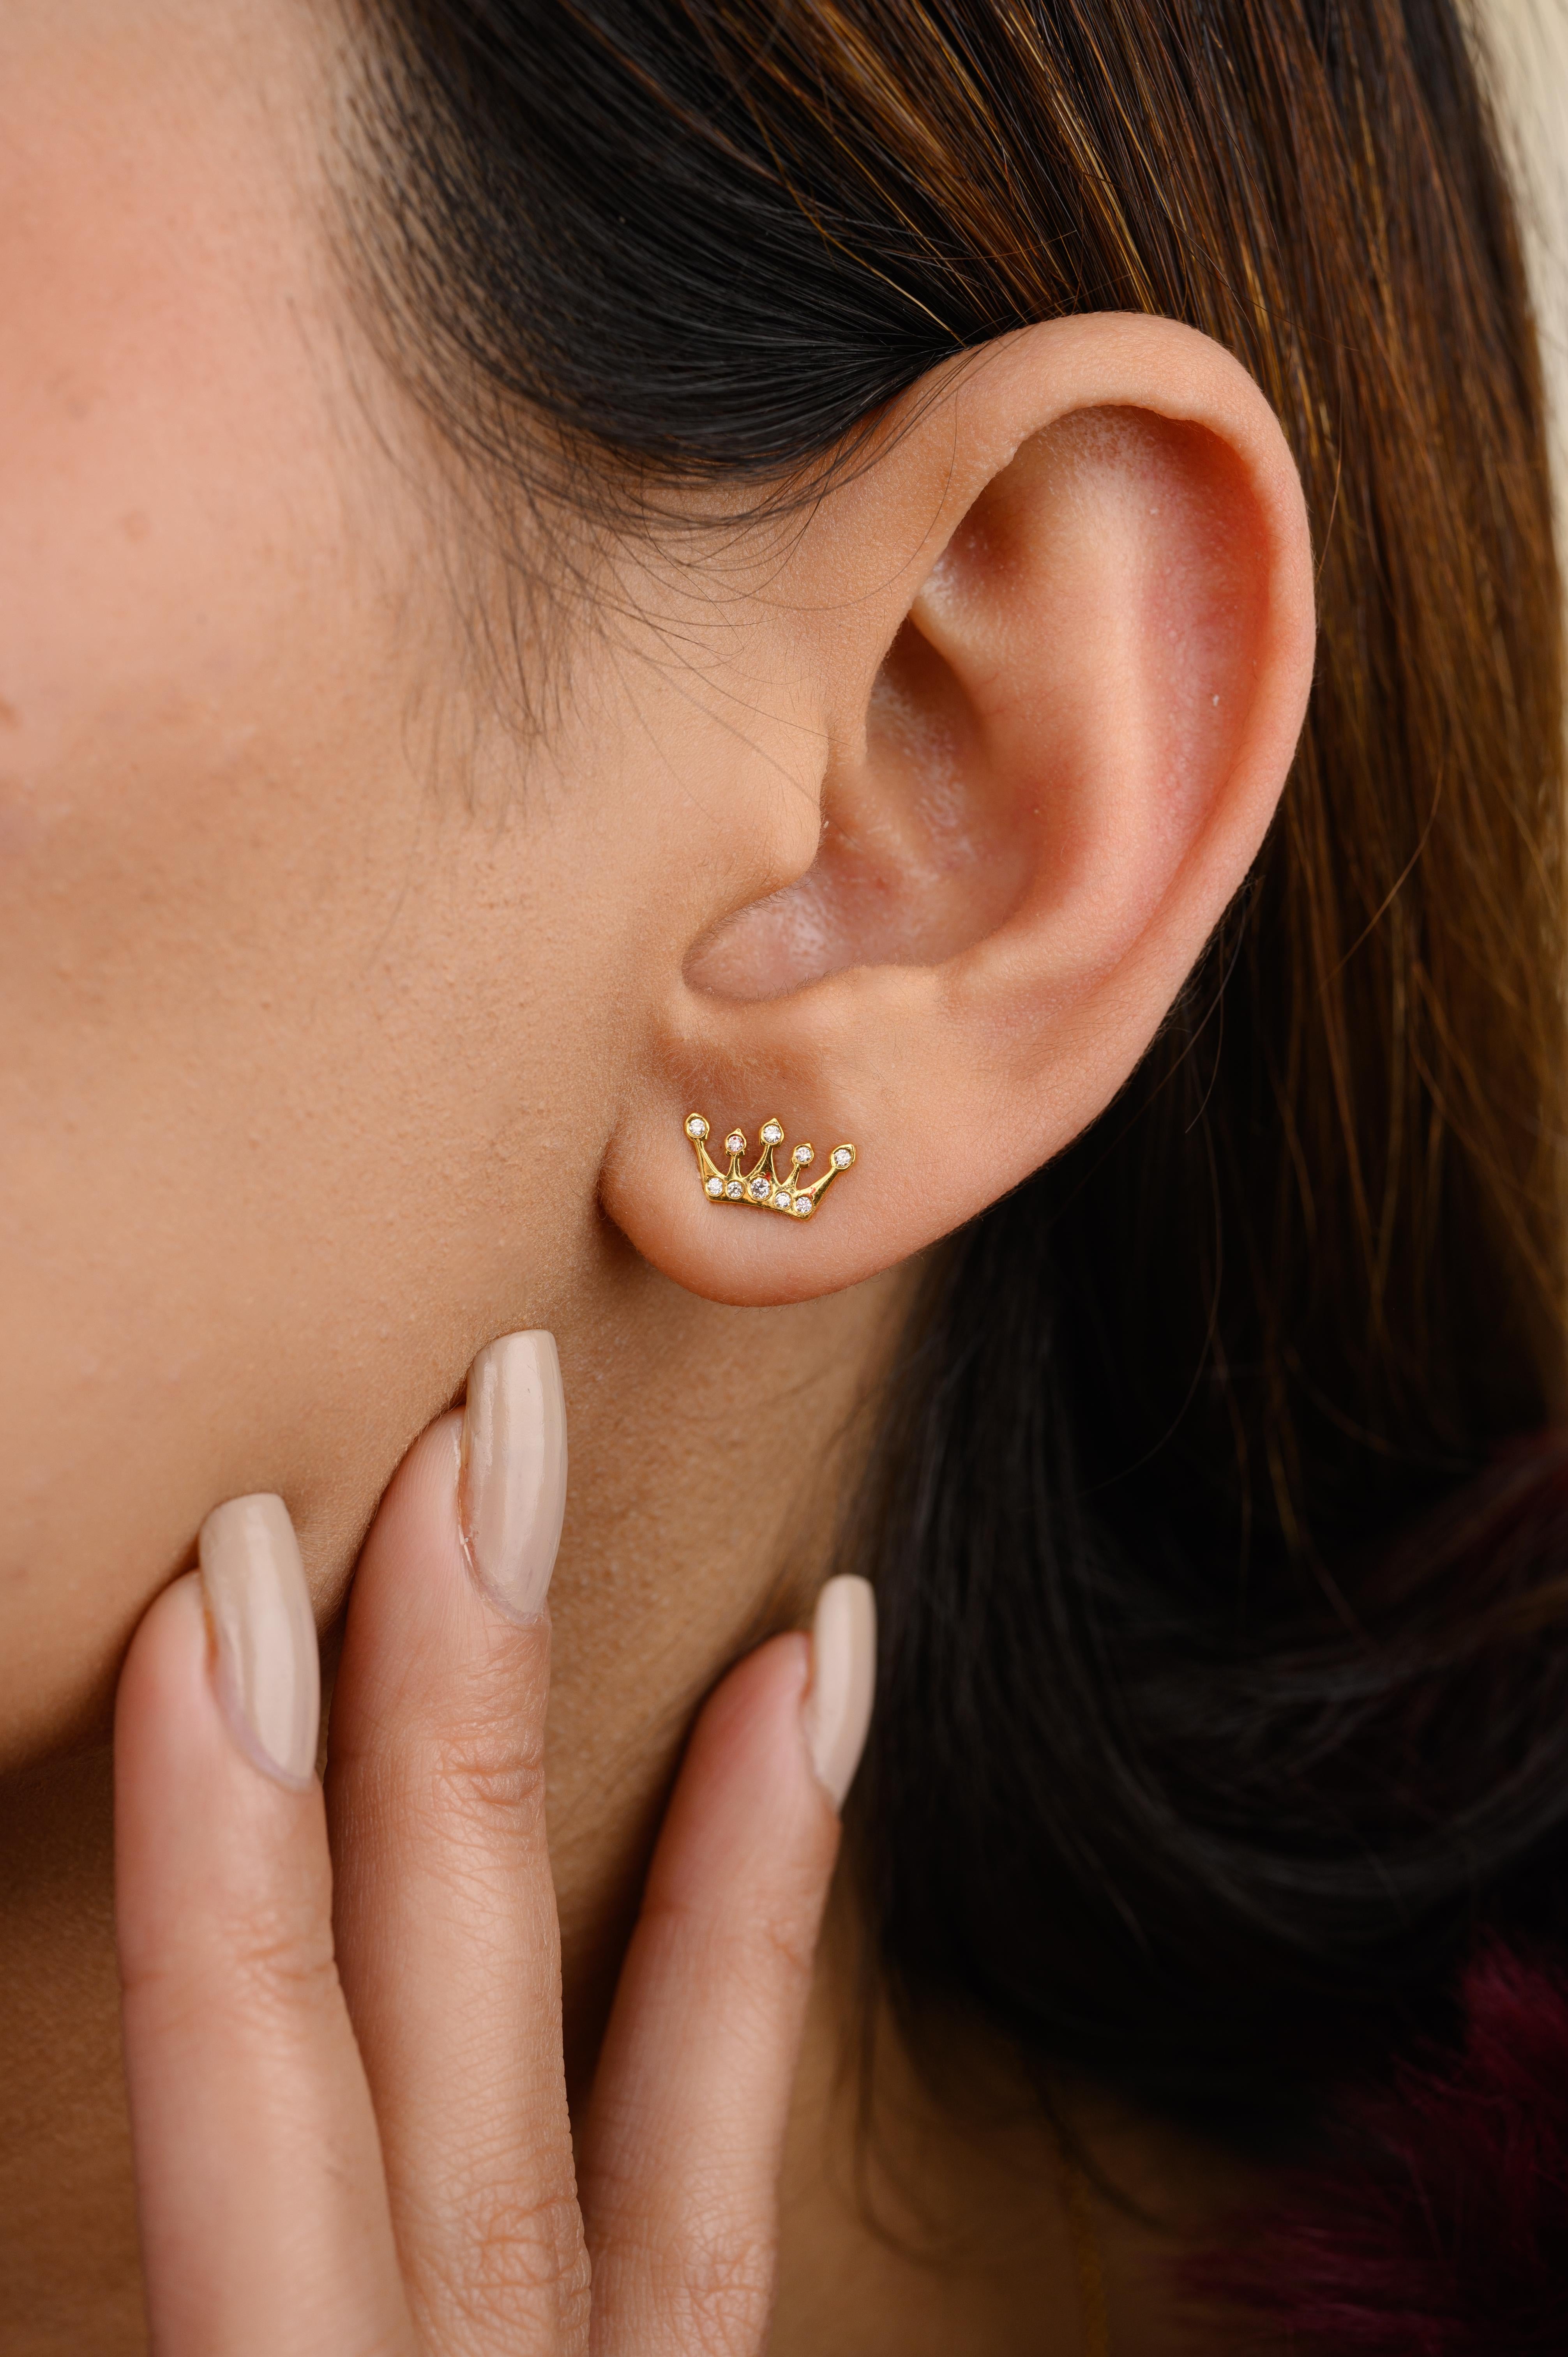 Natural Diamond Crown Stud Earrings in 14K Gold to make a statement with your look. You shall need stud earrings to make a statement with your look. These earrings create a sparkling, luxurious look featuring round cut diamonds.
April birthstone